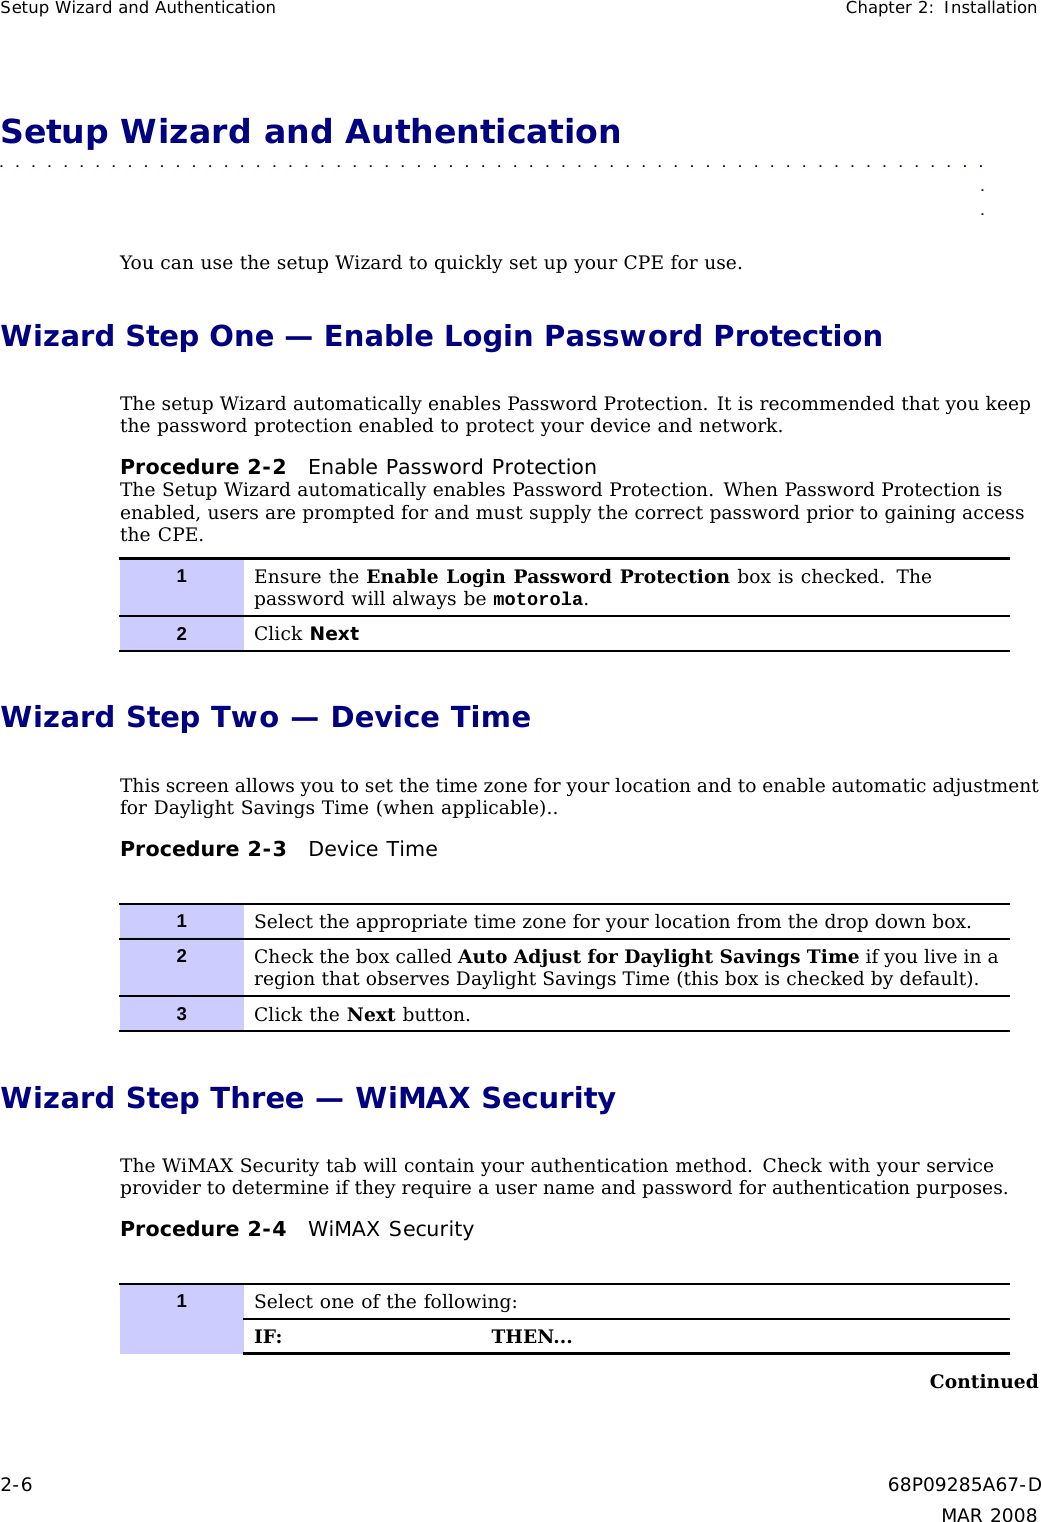 Setup Wizard and Authentication Chapter 2: InstallationSetup Wizard and Authentication■■■■■■■■■■■ ■■■■■■■■■■■■ ■■■■■■■■■■■■■ ■■■■■■■■■■■■■ ■■■■■■■■■■■■■■■You can use the setup Wizard to quickly set up your CPE for use.Wizard Step One — Enable Login Password ProtectionThe setup Wizard automatically enables Password Protection. It is recommended that you keepthe password protection enabled to protect your device and network.Procedure 2-2 Enable Password ProtectionThe Setup Wizard automatically enables Password Protection. When Password Protection isenabled, users are prompted for and must supply the correct password prior to gaining accessthe CPE.1Ensure the Enable Login Password Protection box is checked. Thepassword will always be motorola.2Click NextWizard Step Two — Device TimeThis screen allows you to set the time zone for your location and to enable automatic adjustmentfor Daylight Savings Time (when applicable)..Procedure 2-3 Device Time1Select the appropriate time zone for your location from the drop down box.2Check the box called Auto Adjust for Daylight Savings Time if you live in aregion that observes Daylight Savings Time (this box is checked by default).3Click the Next button.Wizard Step Three — WiMAX SecurityThe WiMAX Security tab will contain your authentication method. Check with your serviceprovider to determine if they require a user name and password for authentication purposes.Procedure 2-4 WiMAX Security1Select one of the following:IF: THEN...Continued2-6 68P09285A67-DMAR 2008